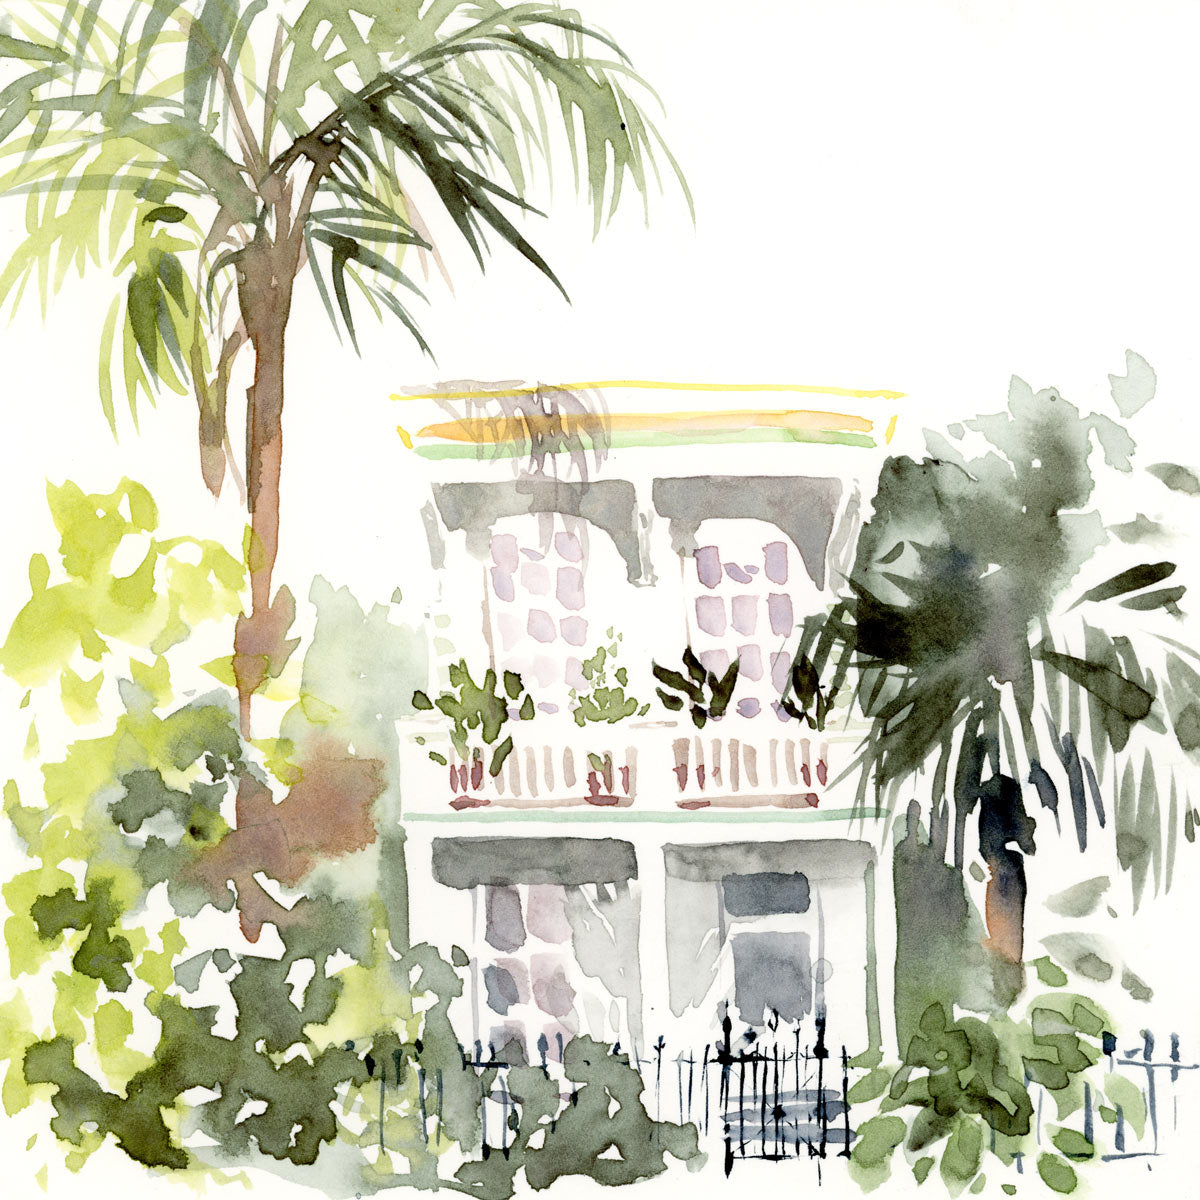 Marigny Tropical Mansion watercolor painting